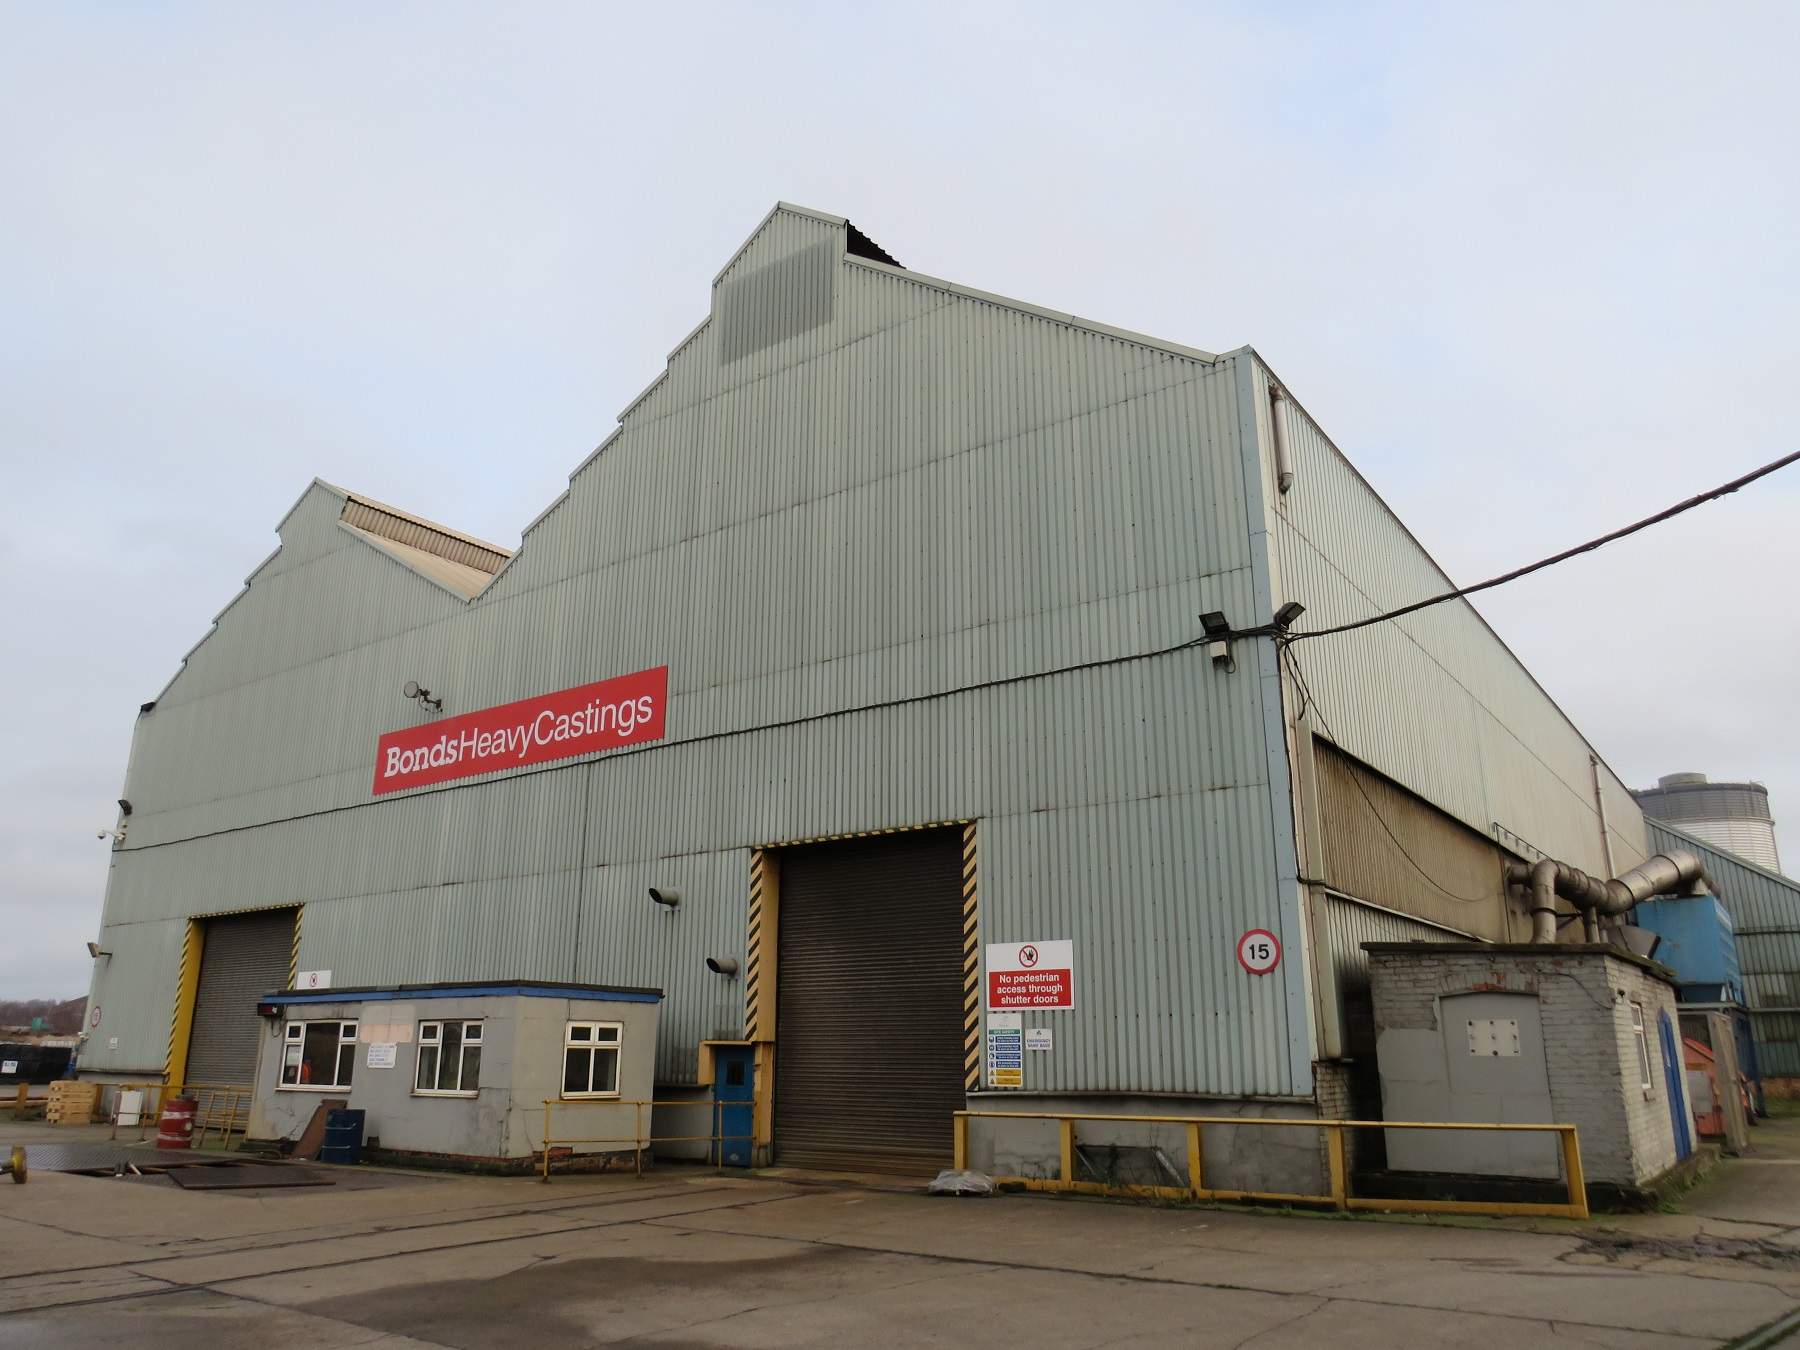 Future looks ‘positive’ as buyer is sought for Bonds Heavy Castings Site in Scunthorpe